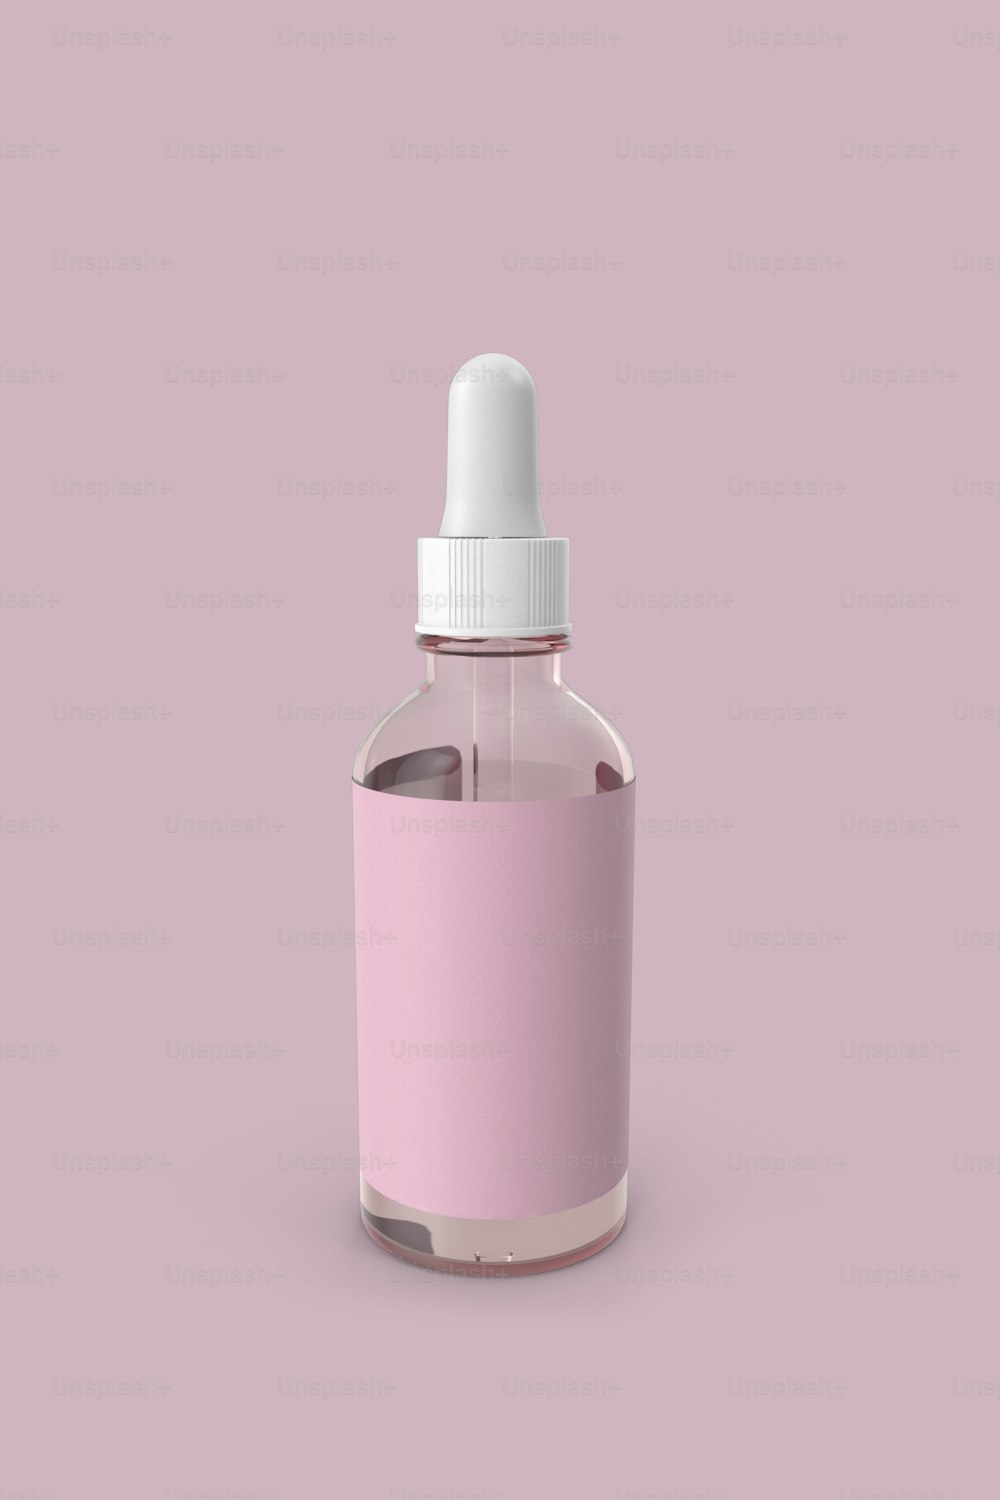 a pink bottle with a white cap on a pink background